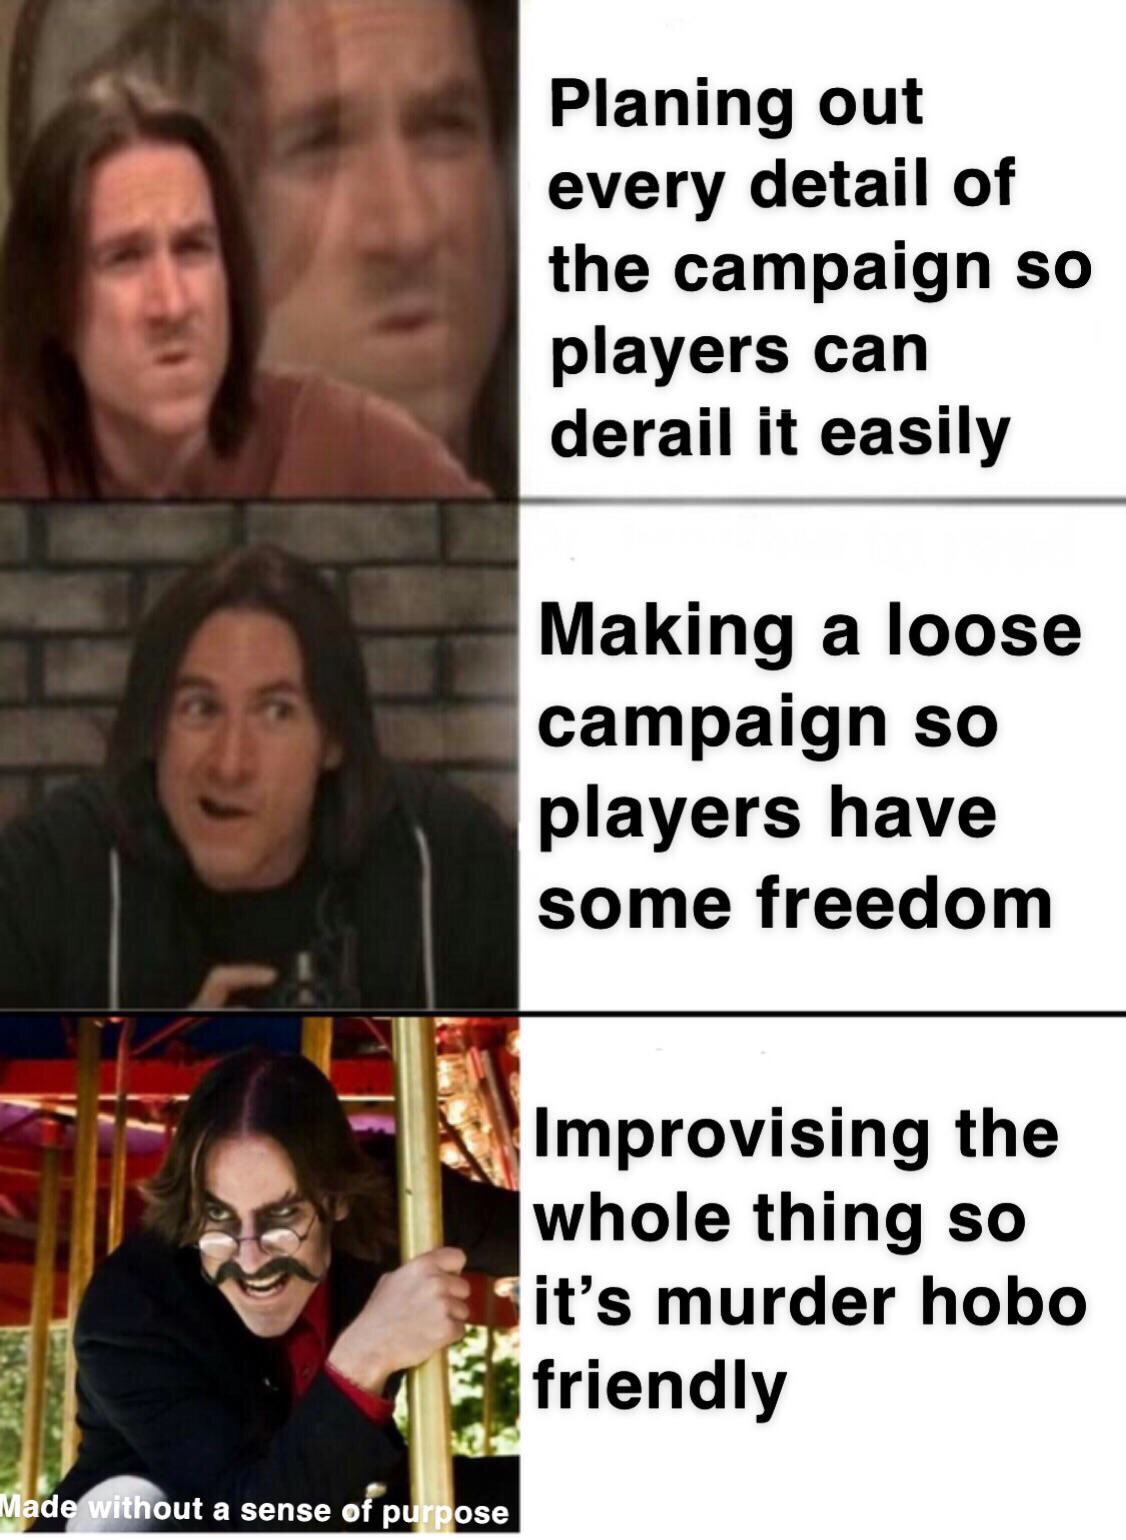 D&D meme - dungeons and dragons meme - Planing out every detail of the campaign so players can derail it easily Making a loose campaign so players have some freedom Improvising the whole thing so it's murder hobo friendly Made without a sense of purpose